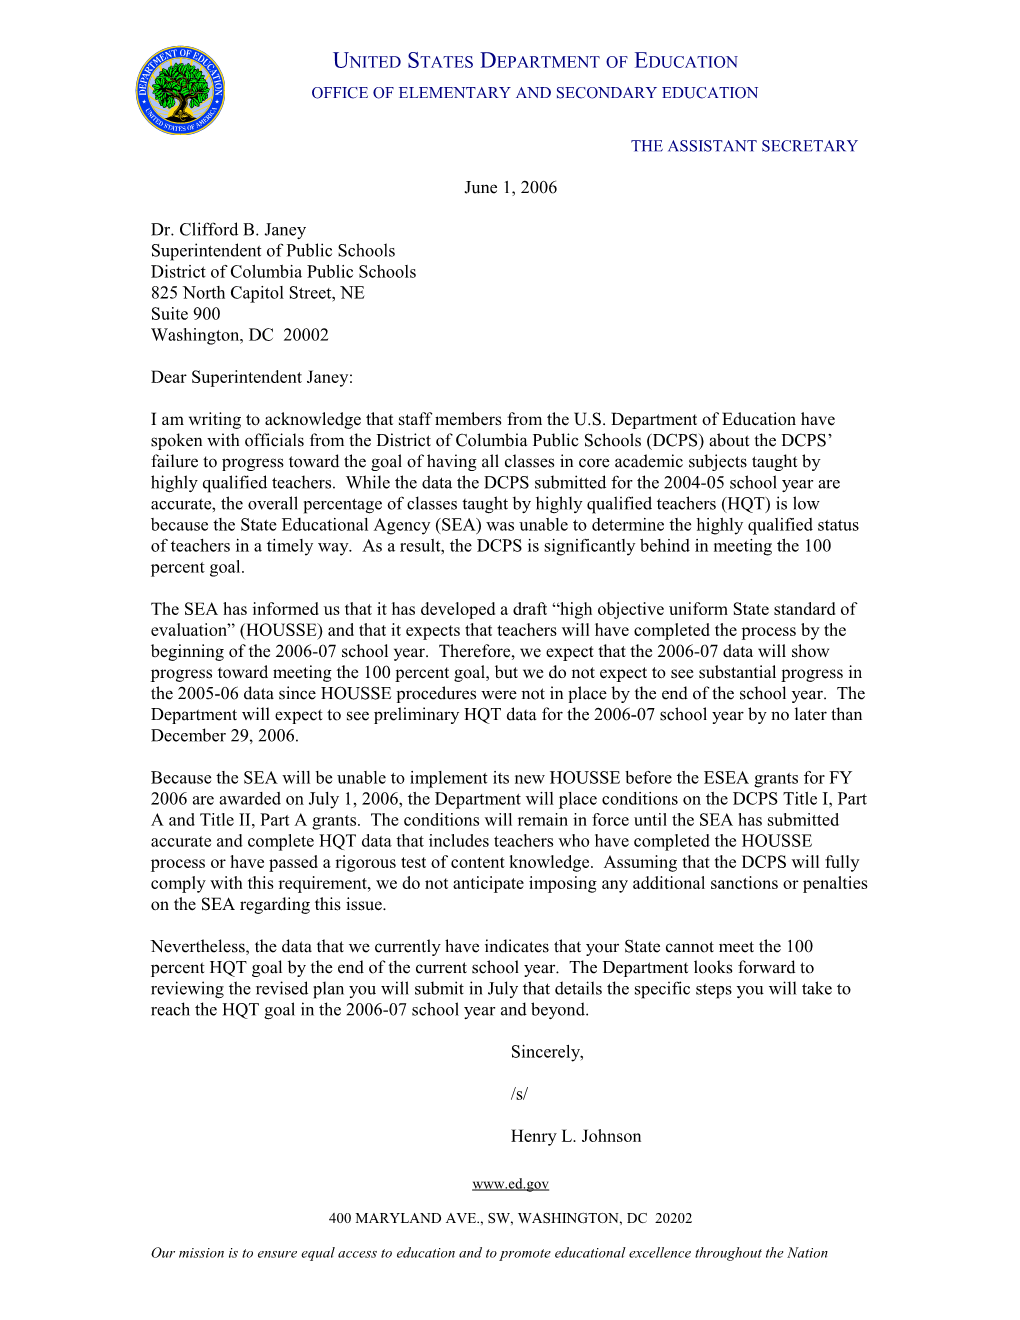 Letter to Superintendent of District of Columbia Public Schools from Assistant Secretary